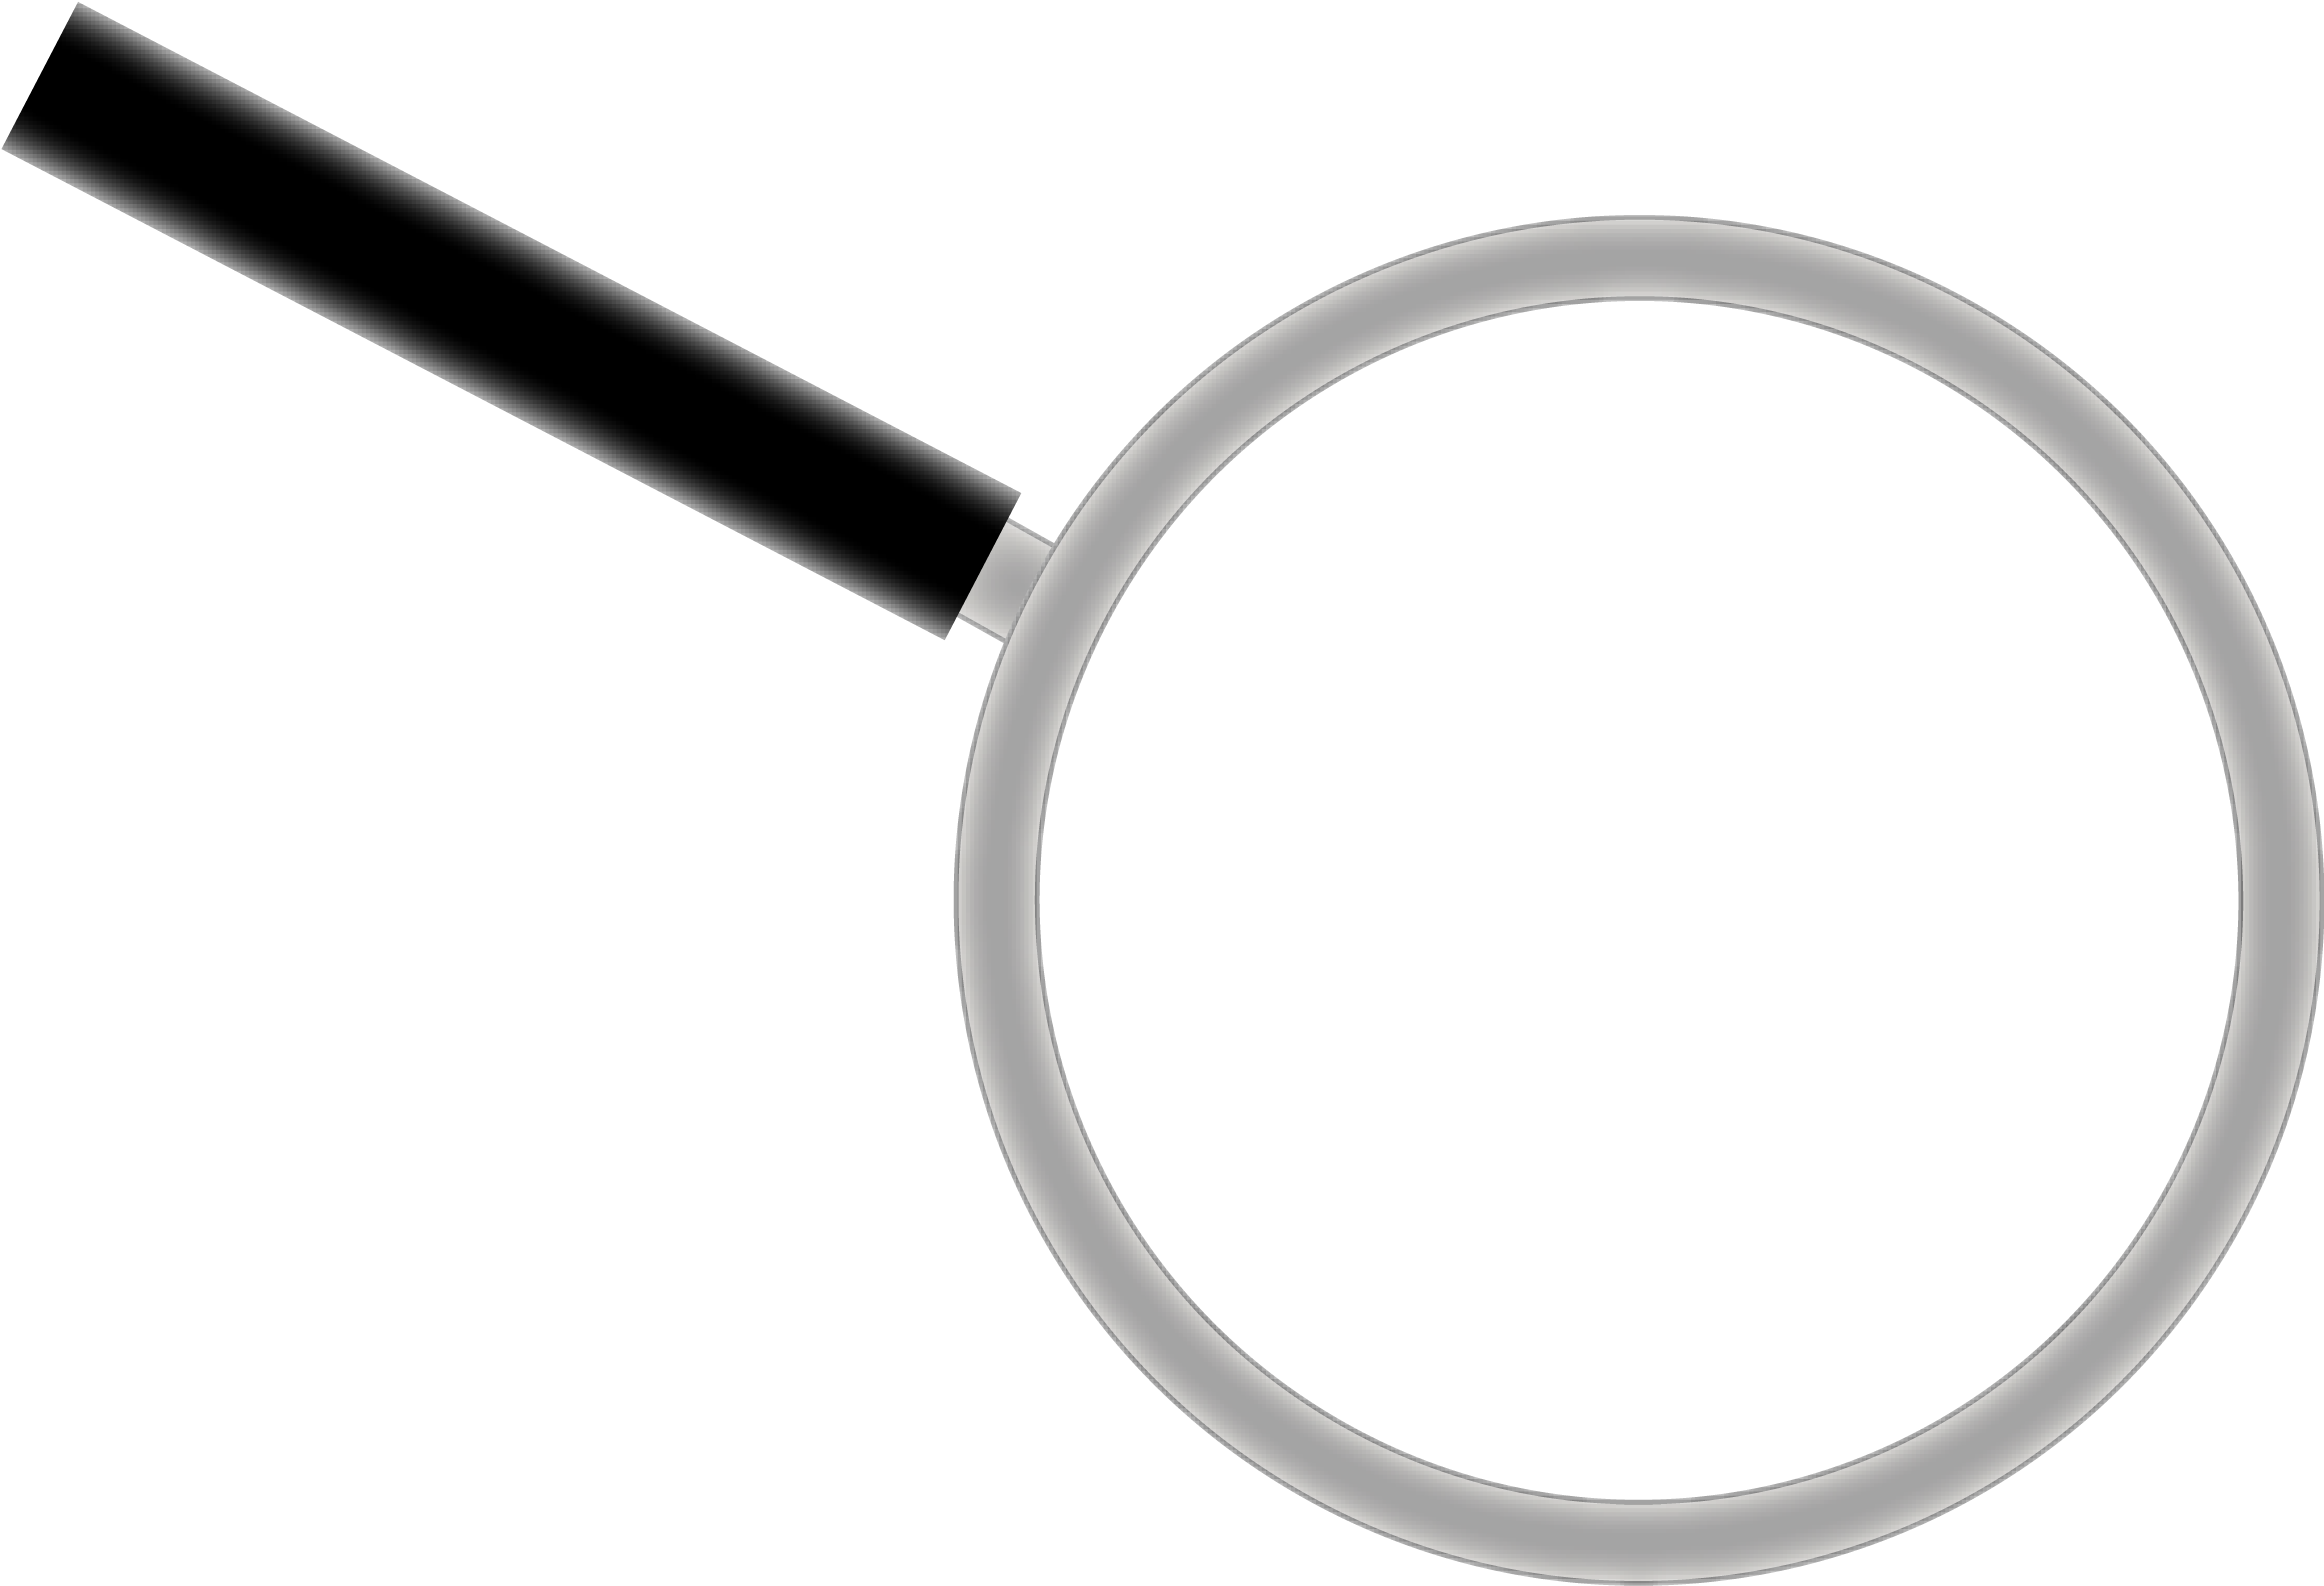 A White Circle With A Black Handle